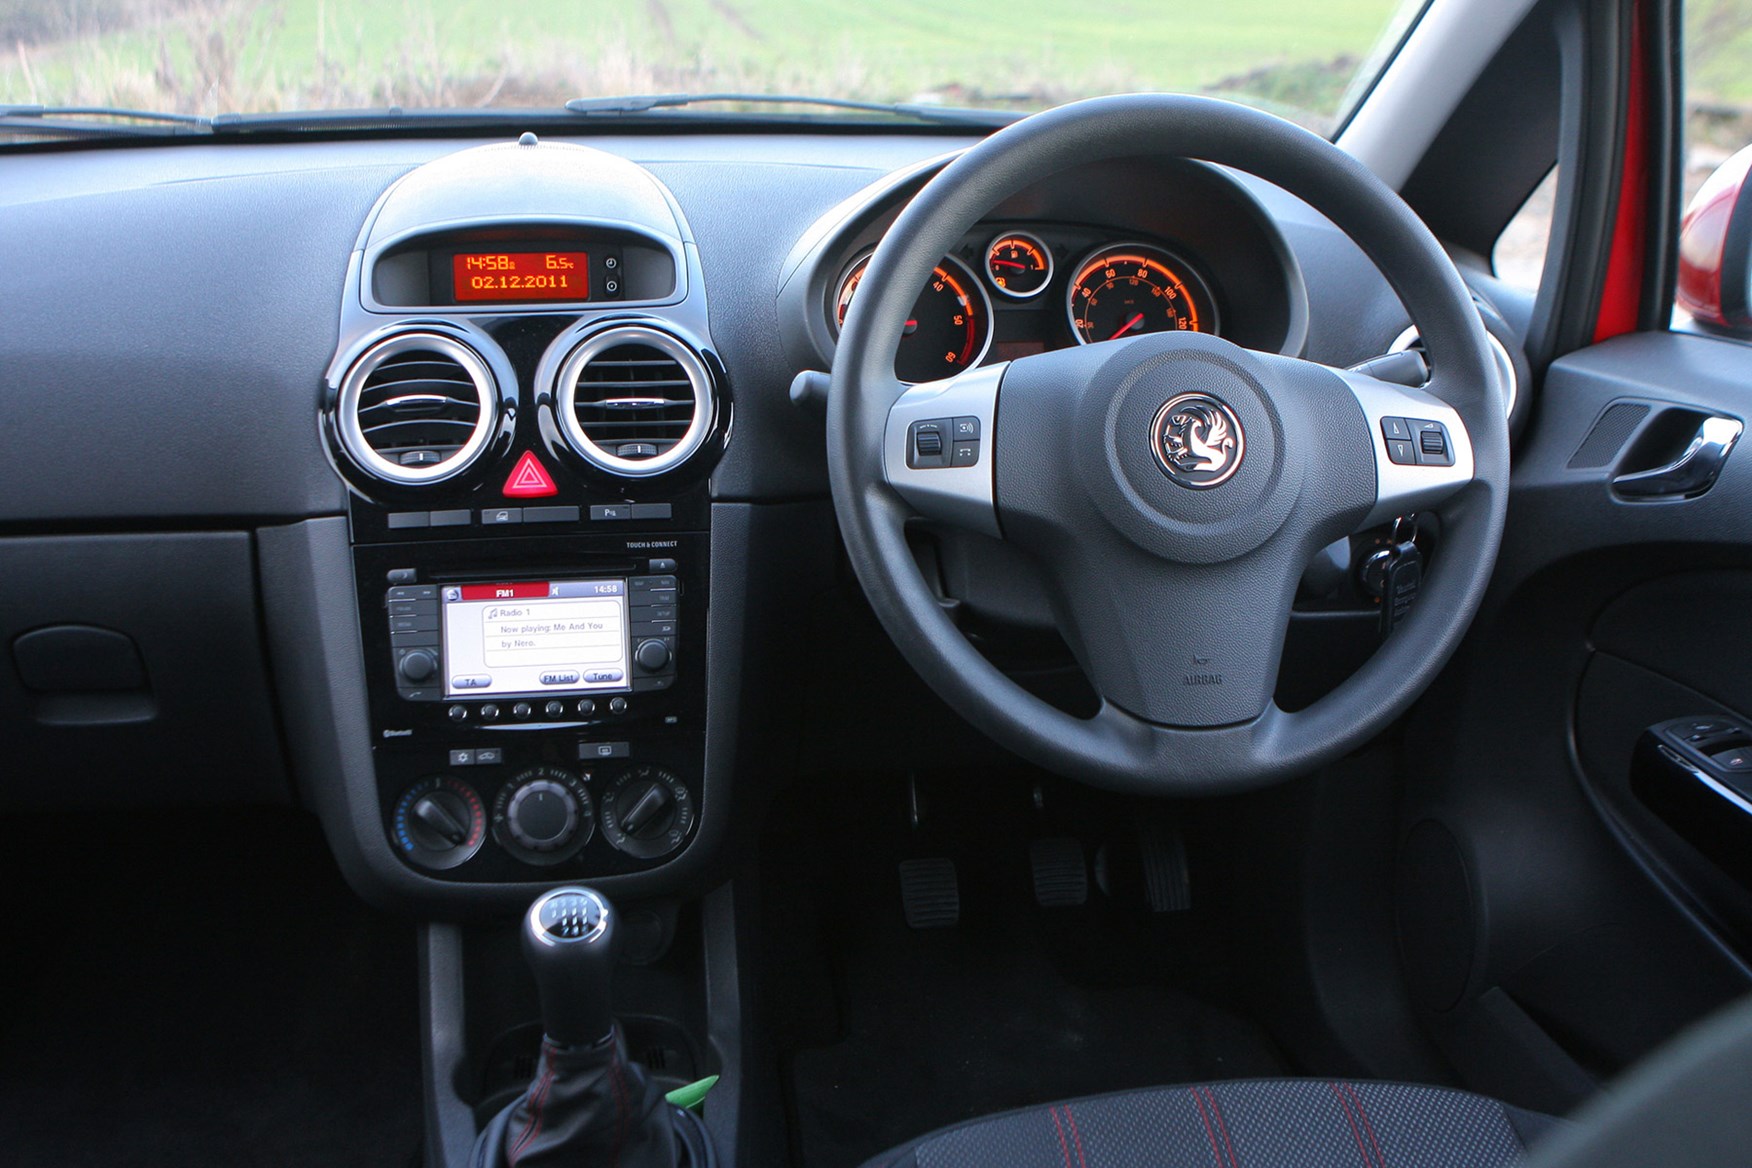 Vauxhall Corsa review on Parkers Vans - in the driver's seat